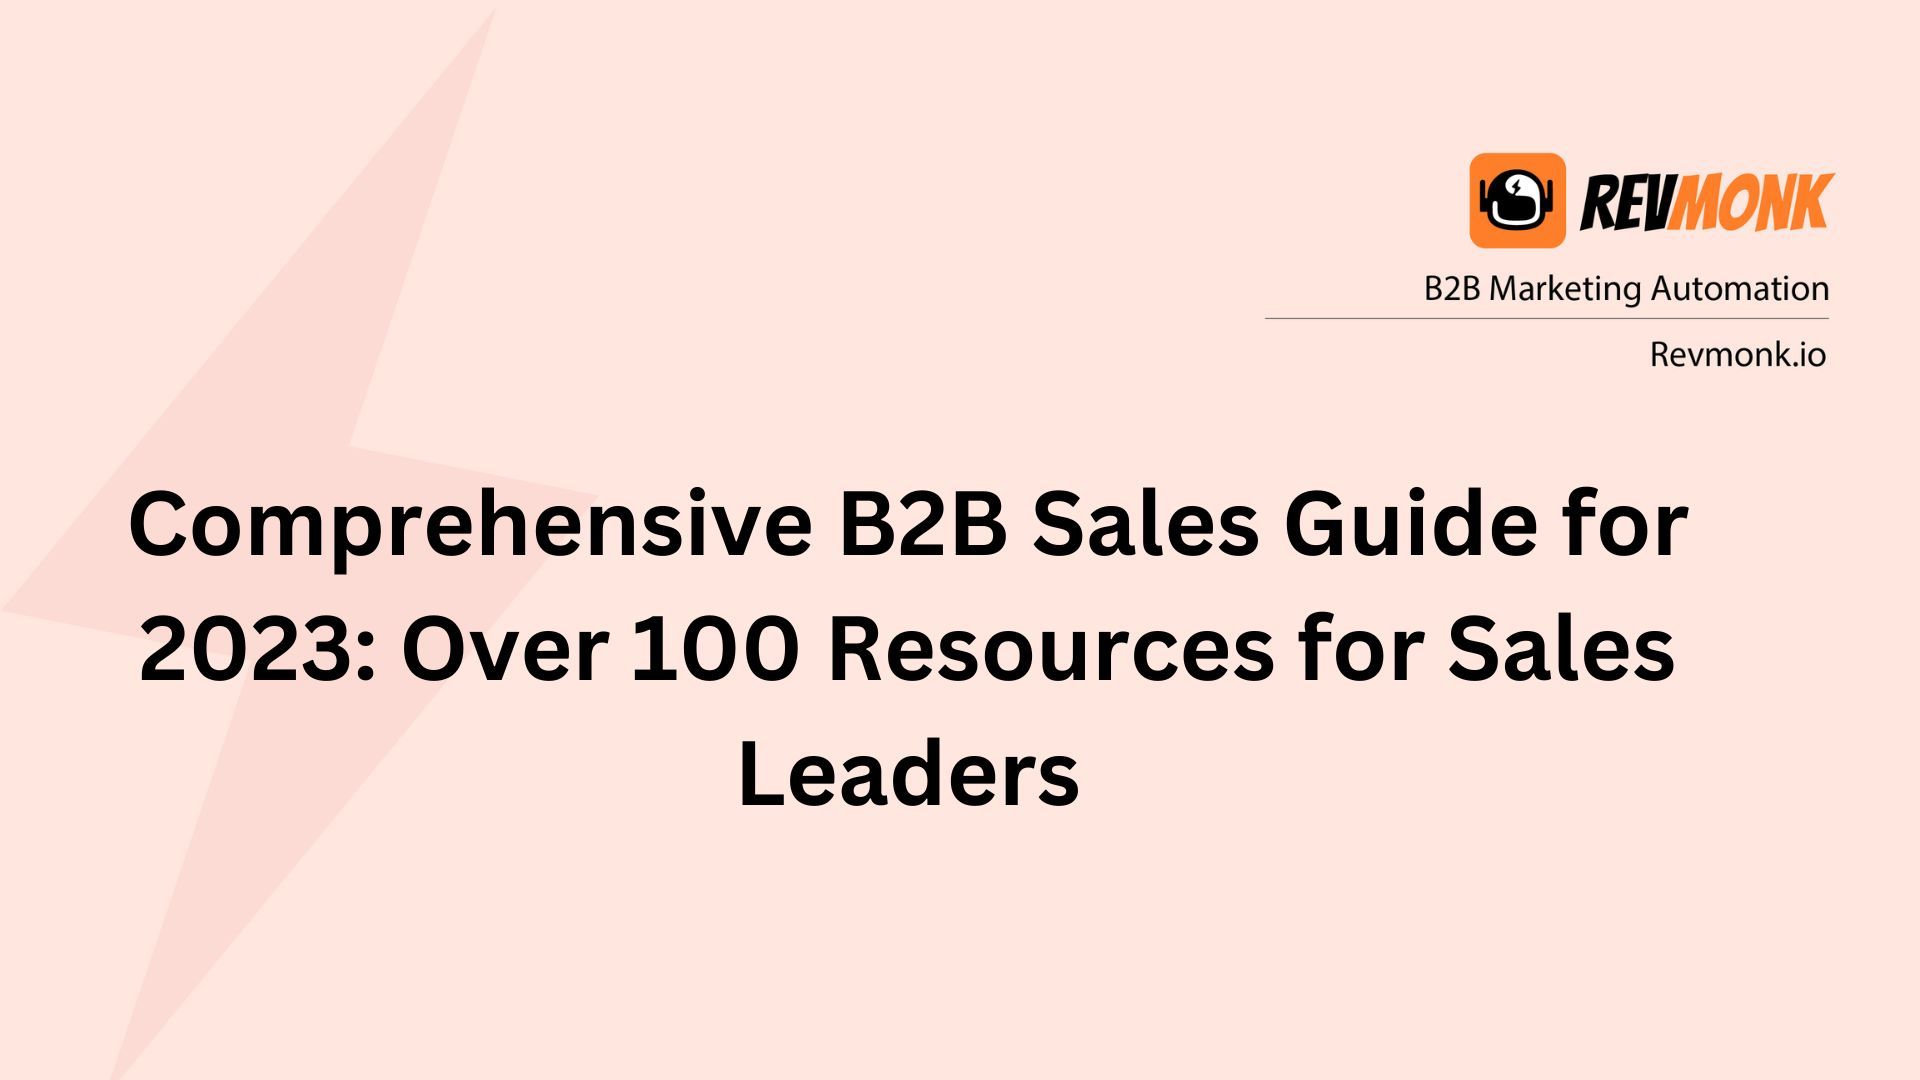 Comprehensive B2B Sales Guide for 2023: Over 100 Resources for Sales Leaders